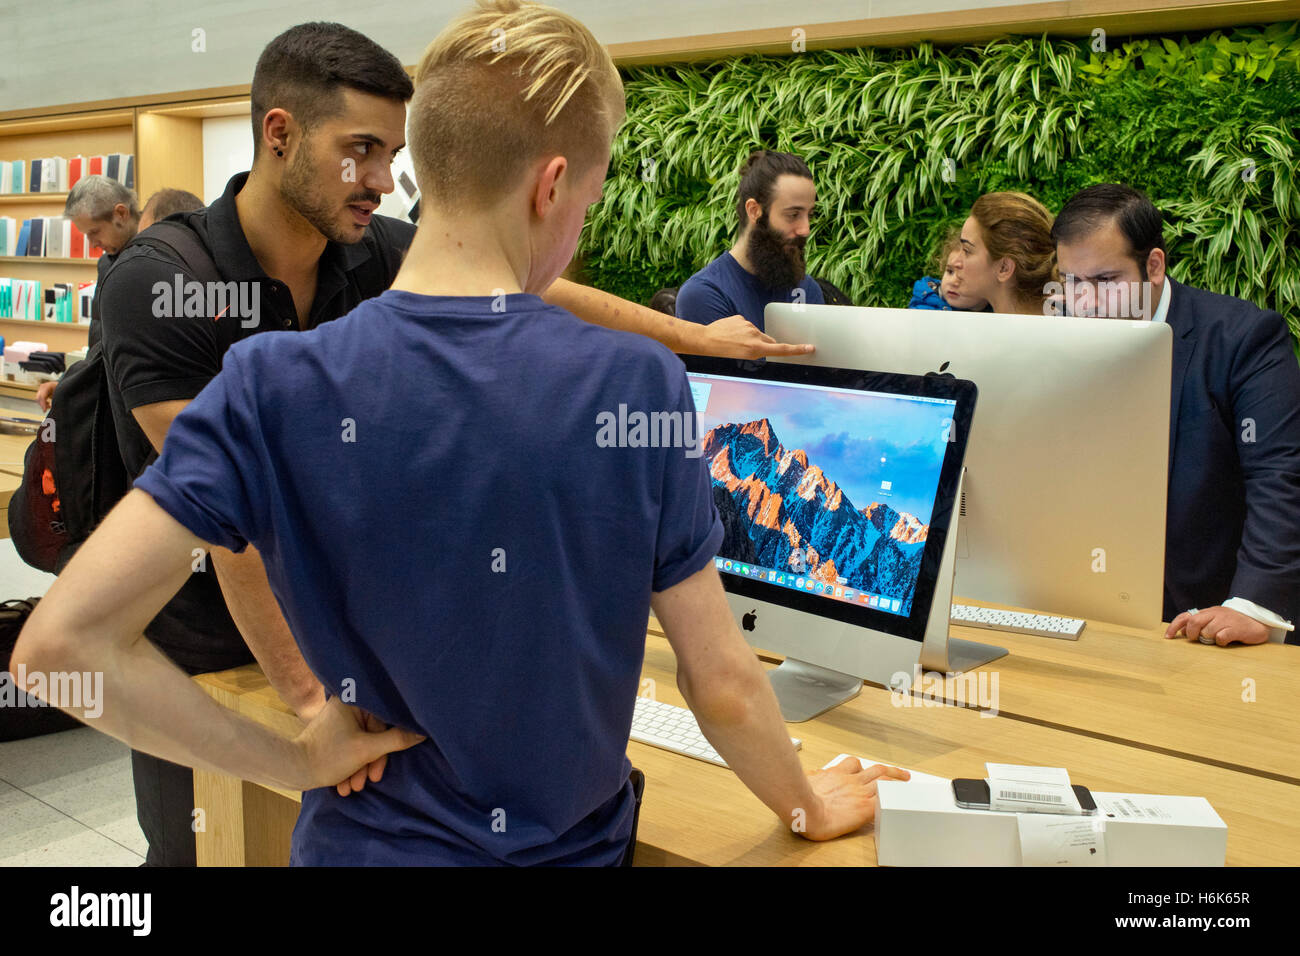 Staff at the Apple Store in downtown Summerlin alert customers